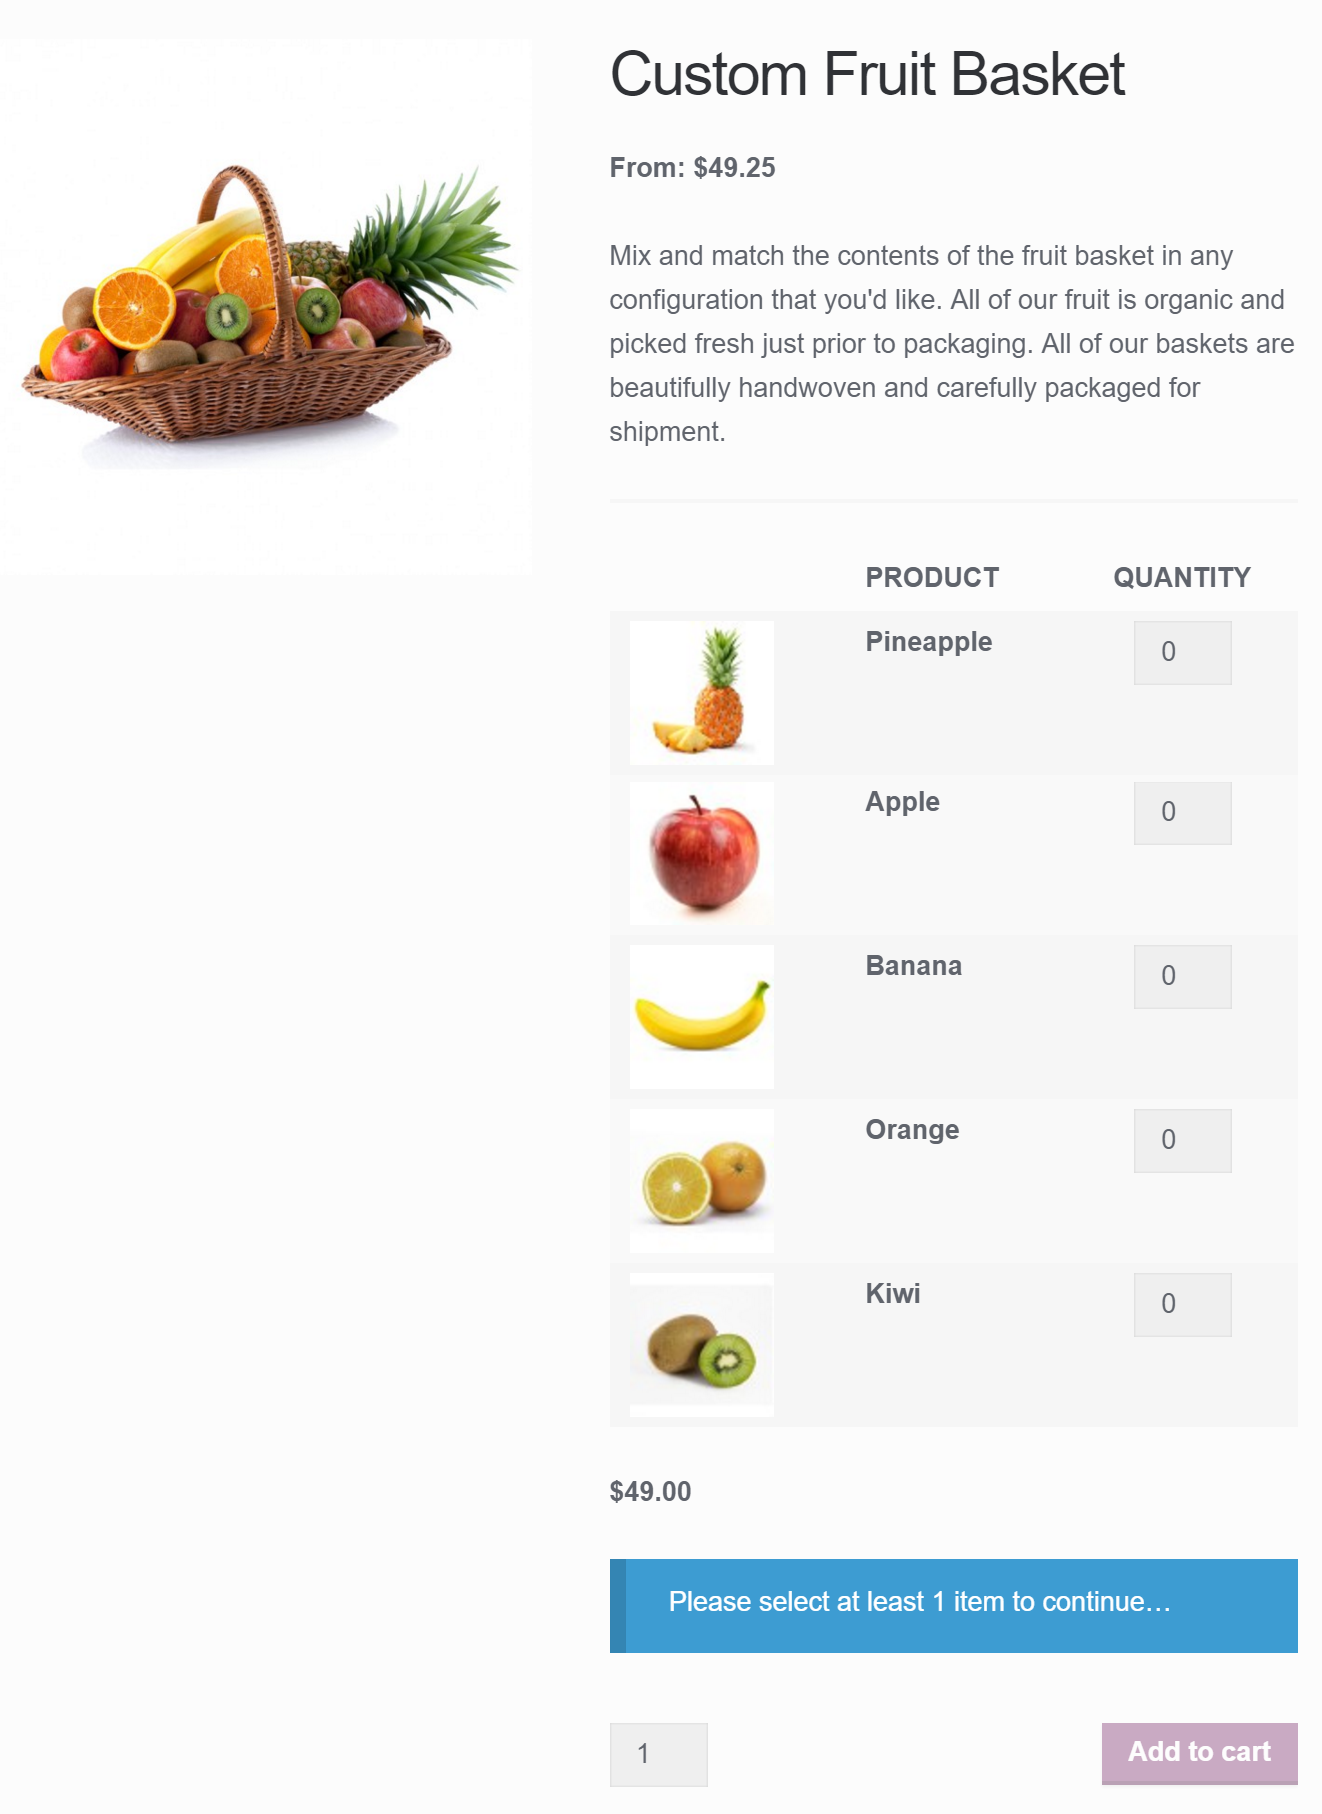 Mix and Match fruit basket with per-item pricing and base price